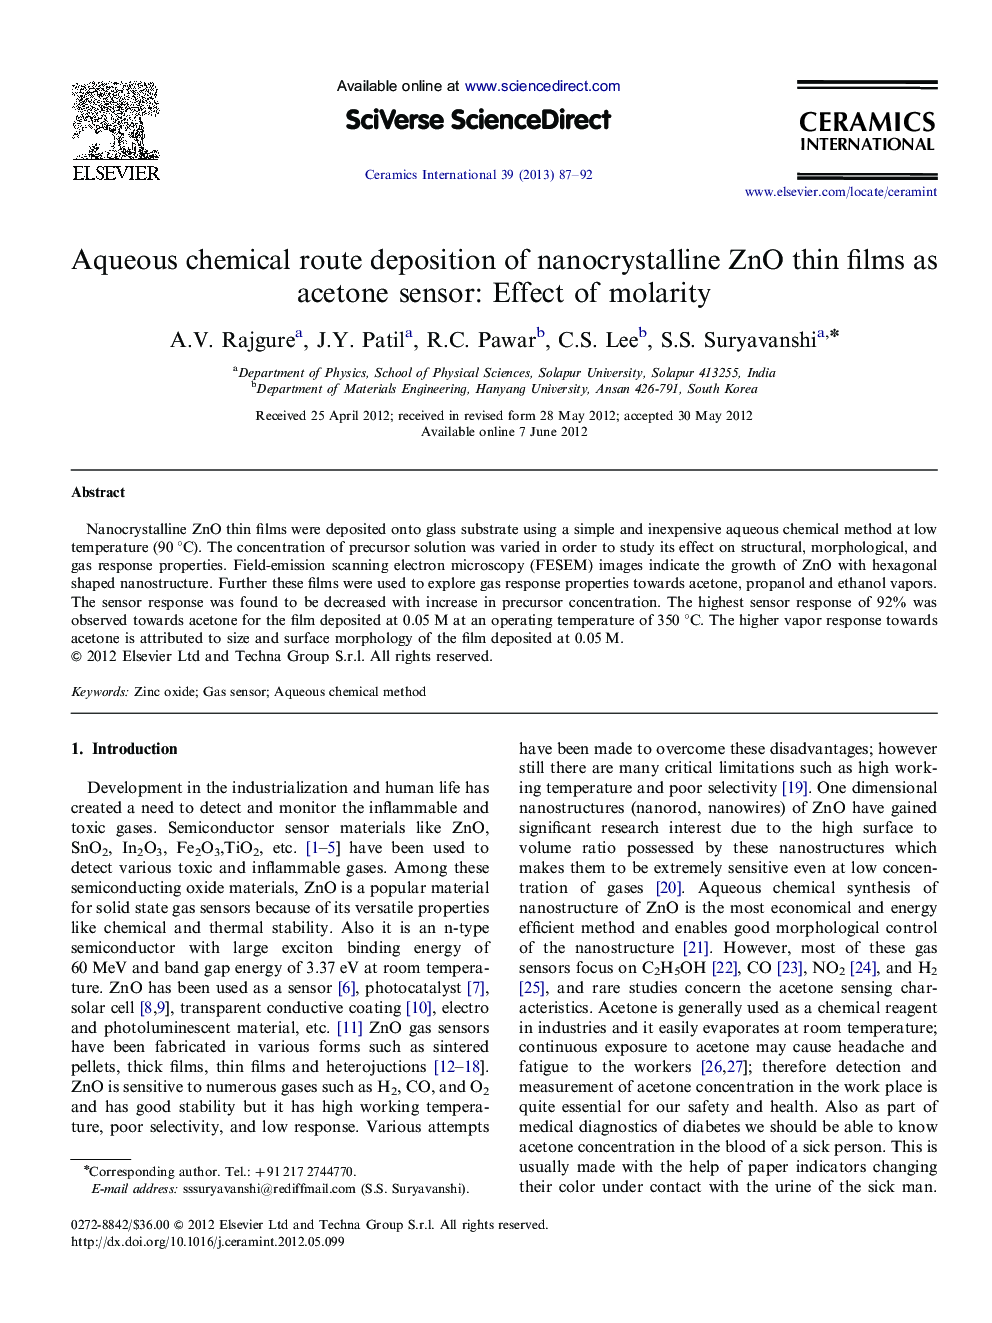 Aqueous chemical route deposition of nanocrystalline ZnO thin films as acetone sensor: Effect of molarity